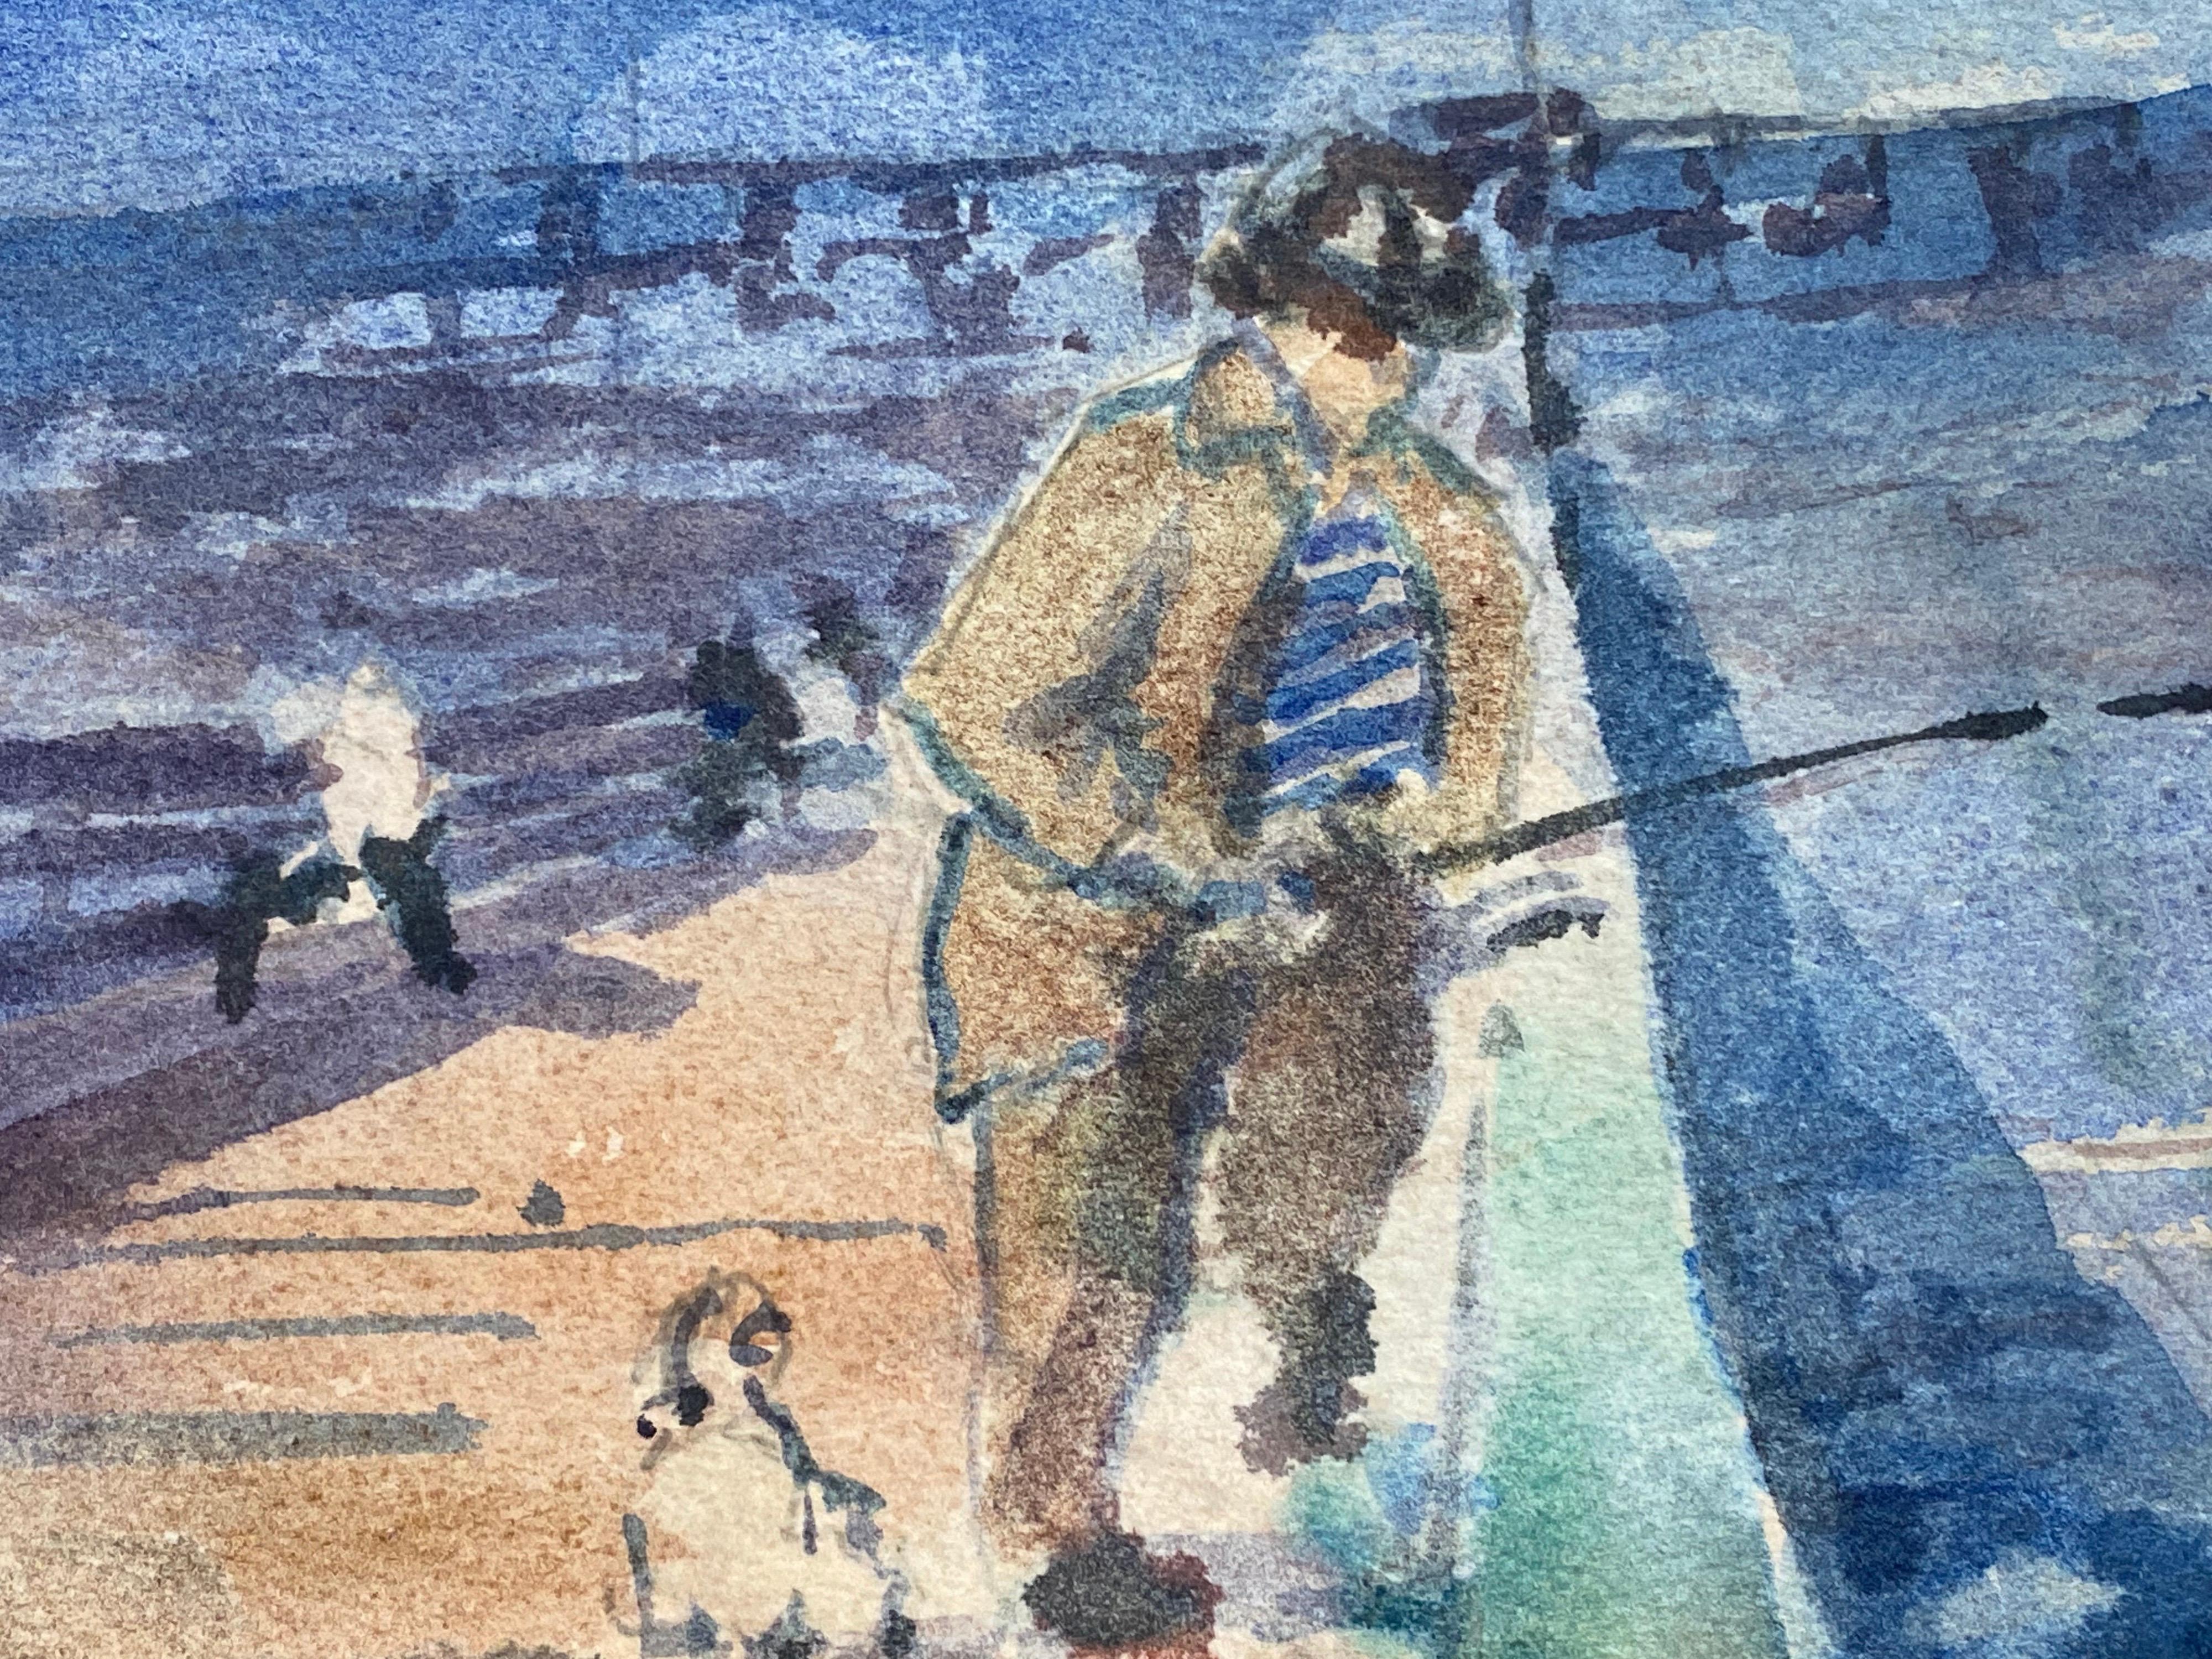 Le Pecheur
by Maurice Mazeilie (French)
watercolour painting on paper, unframed
stamped verso

painting: 6 x 9 inches

A delightful original painting by the 20th century French Impressionist artist, Maurice Mazeilie. The painting has